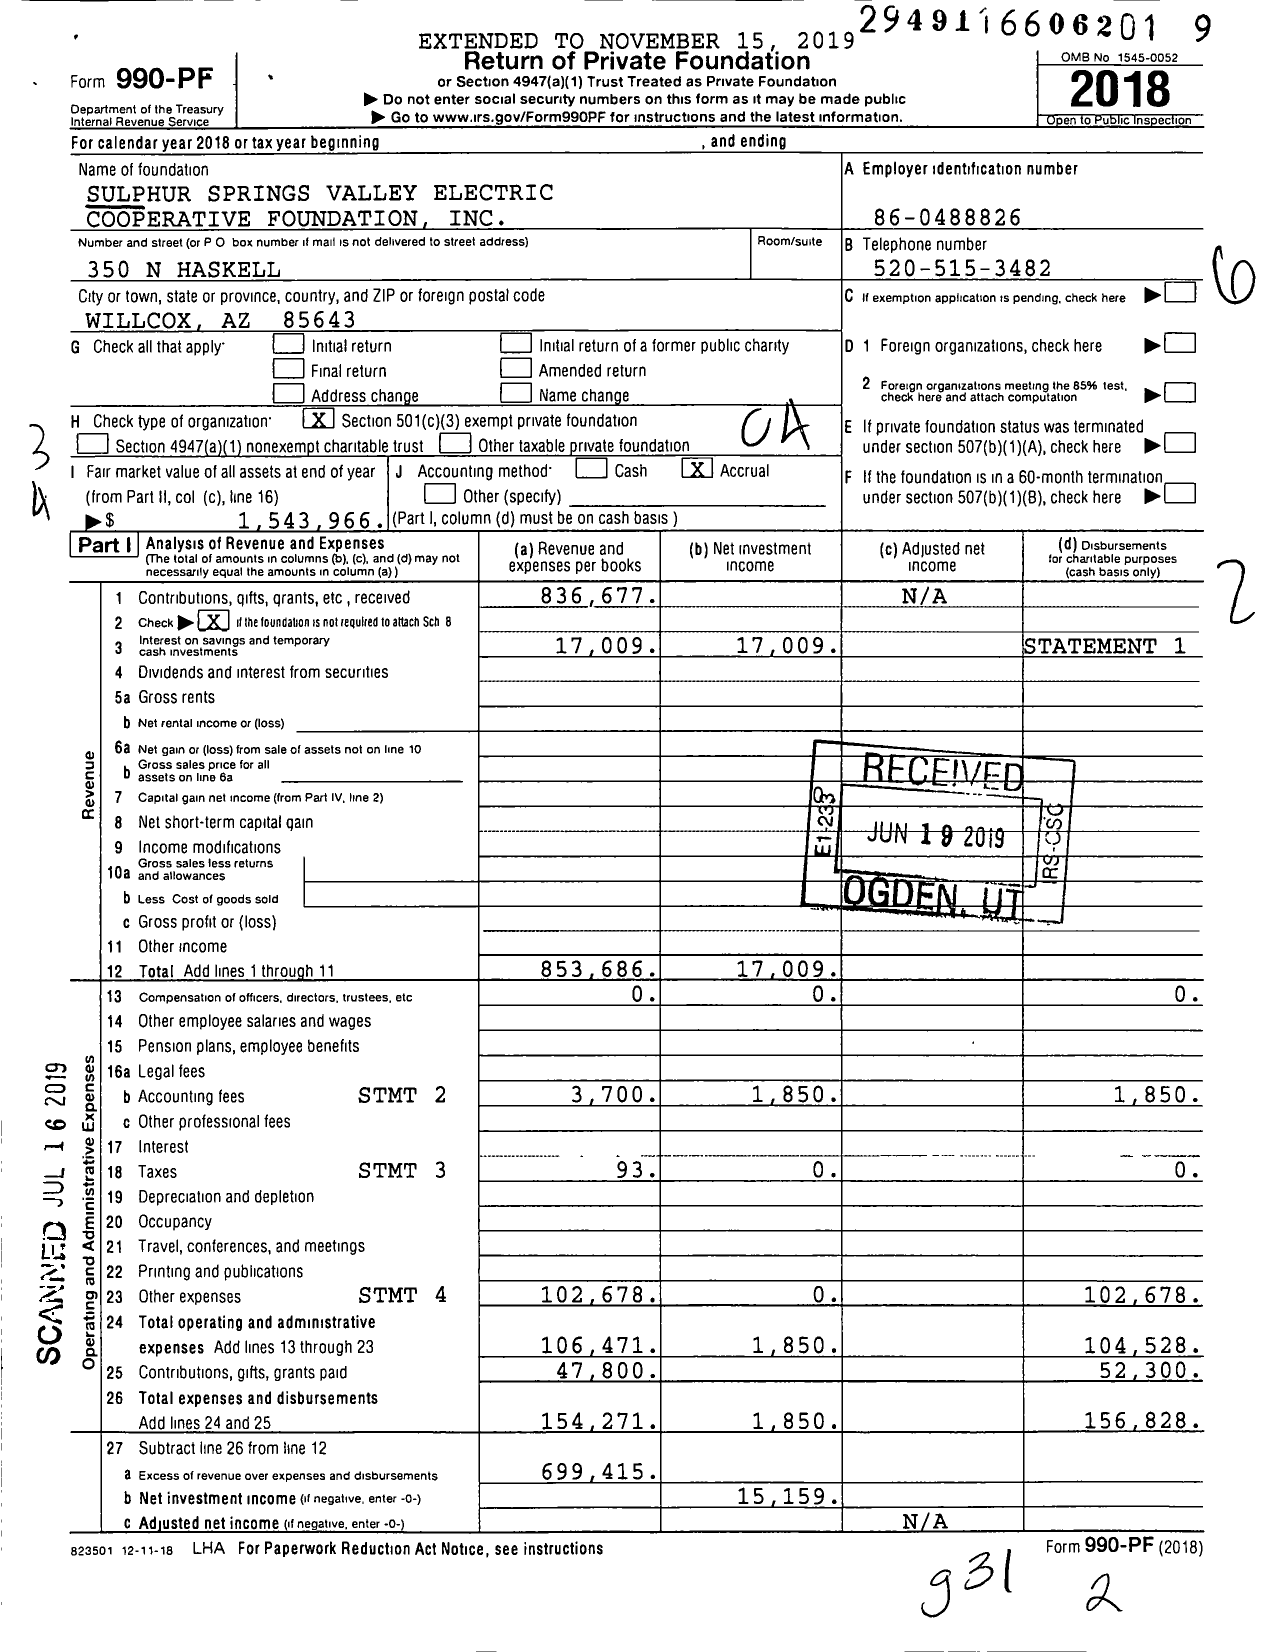 Image of first page of 2018 Form 990PF for Sulphur Springs Valley Electric Cooperative Foundation